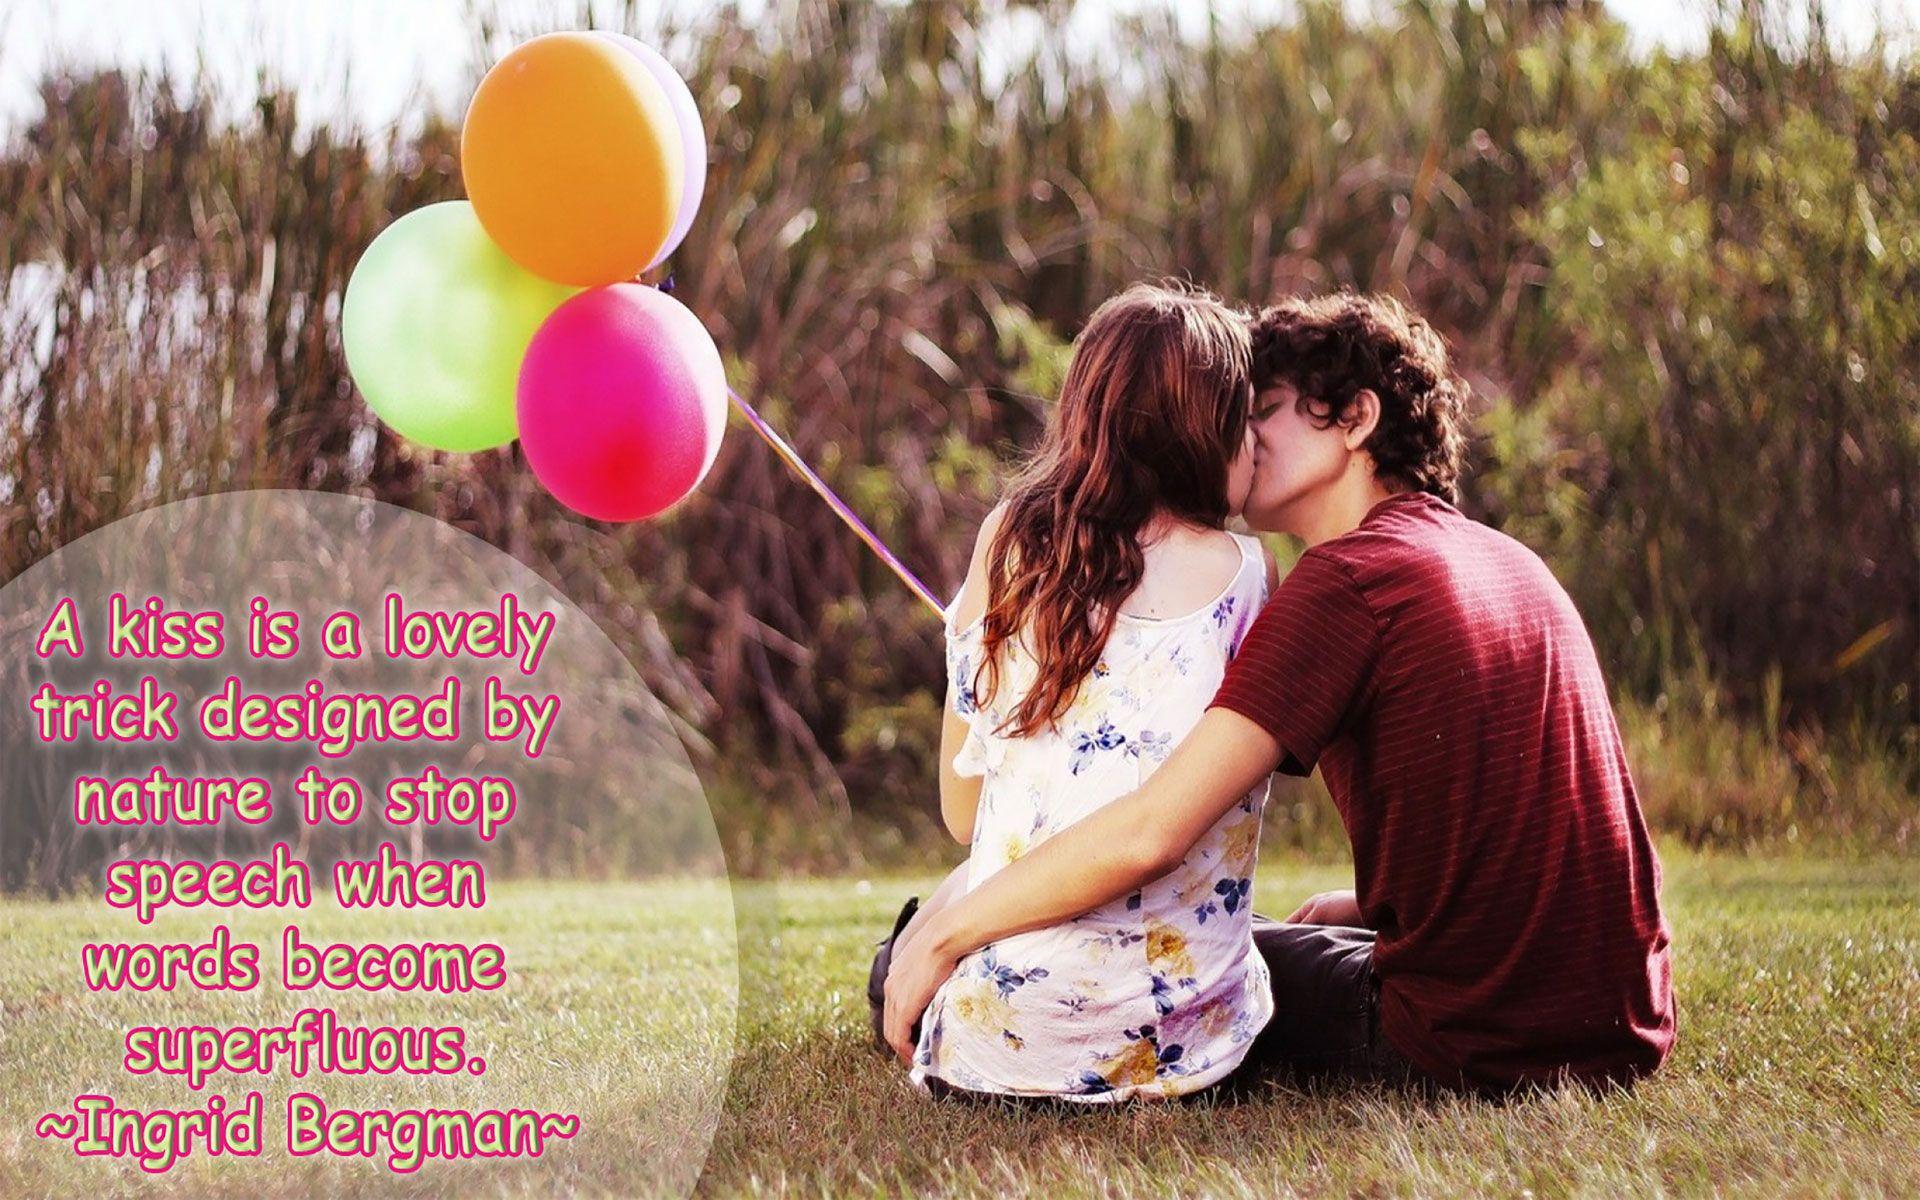 Love Quotes Wallpaper -Romantic Couple Image with Quotes